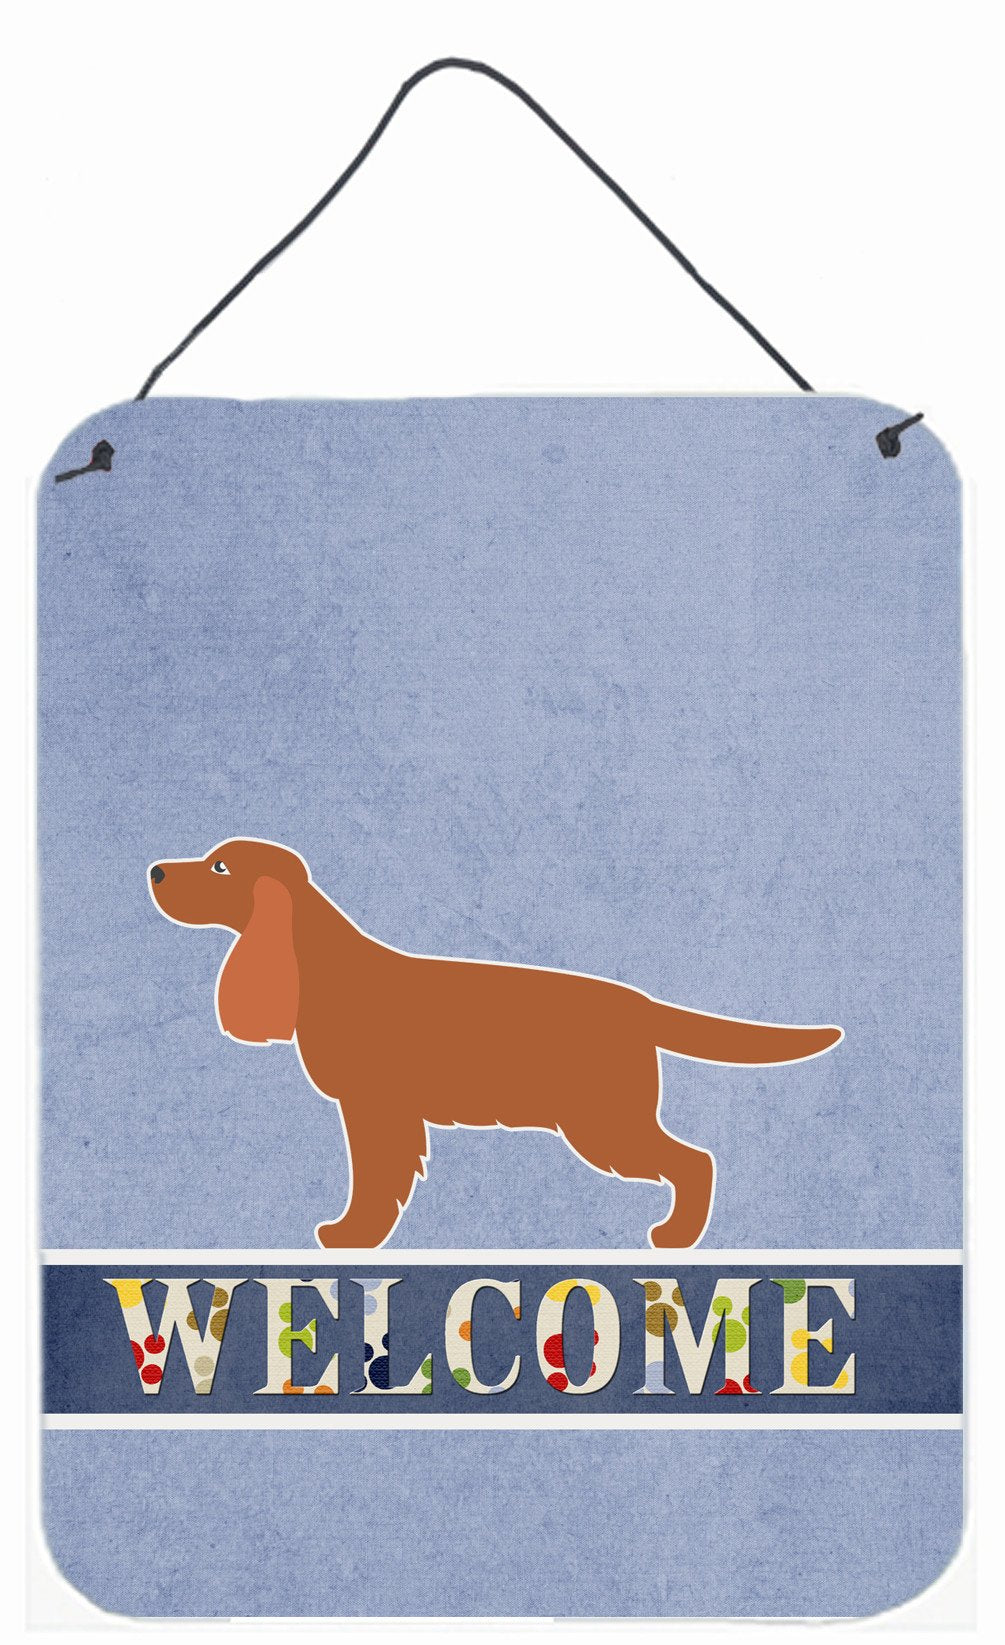 English Cocker Spaniel Welcome Wall or Door Hanging Prints BB5516DS1216 by Caroline's Treasures